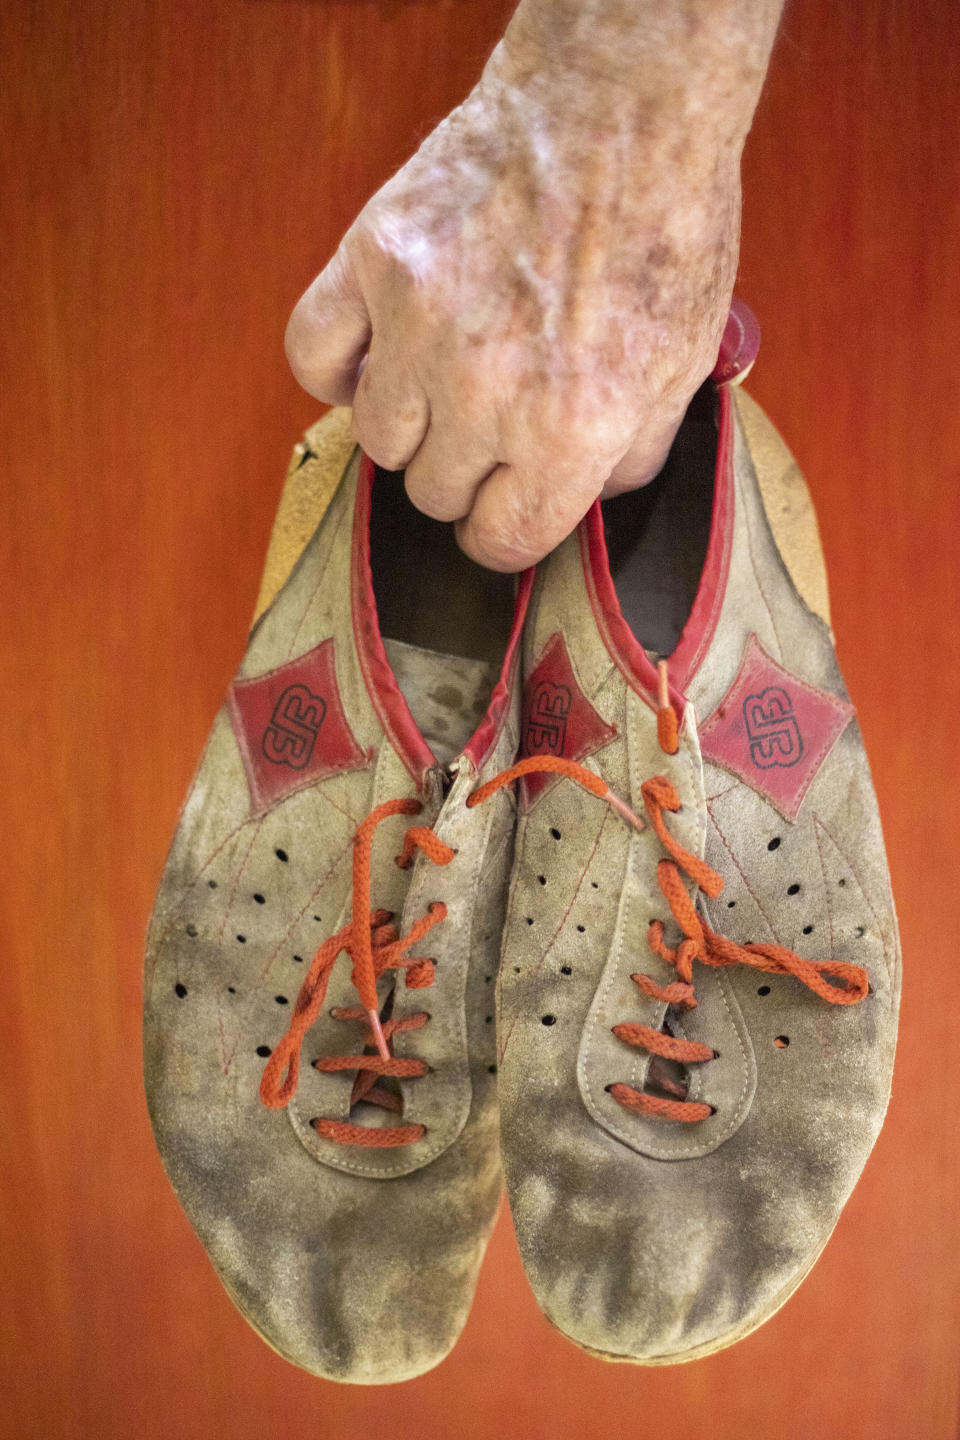 Israeli Olympic racewalker Shaul Ladany holds his 1972's Olympic race shoes for a portrait in Omer, Israel, Sunday, July 12, 2020. In an instant, the world record holder in the 50-mile walk was thrust into one of sports’ greatest tragedies and a seminal moment in modern history _ the kidnapping and massacre of his fellow Israeli team members at the 1972 Munich Olympics. The killing shocked the world, gave the Palestinian cause an audience and ushered in a new era of global terrorism. Ladany, a Holocaust survivor, the lessons still linger. He says it taught him to “never be afraid” but become “more careful.” AP Photo/Ariel Schalit)